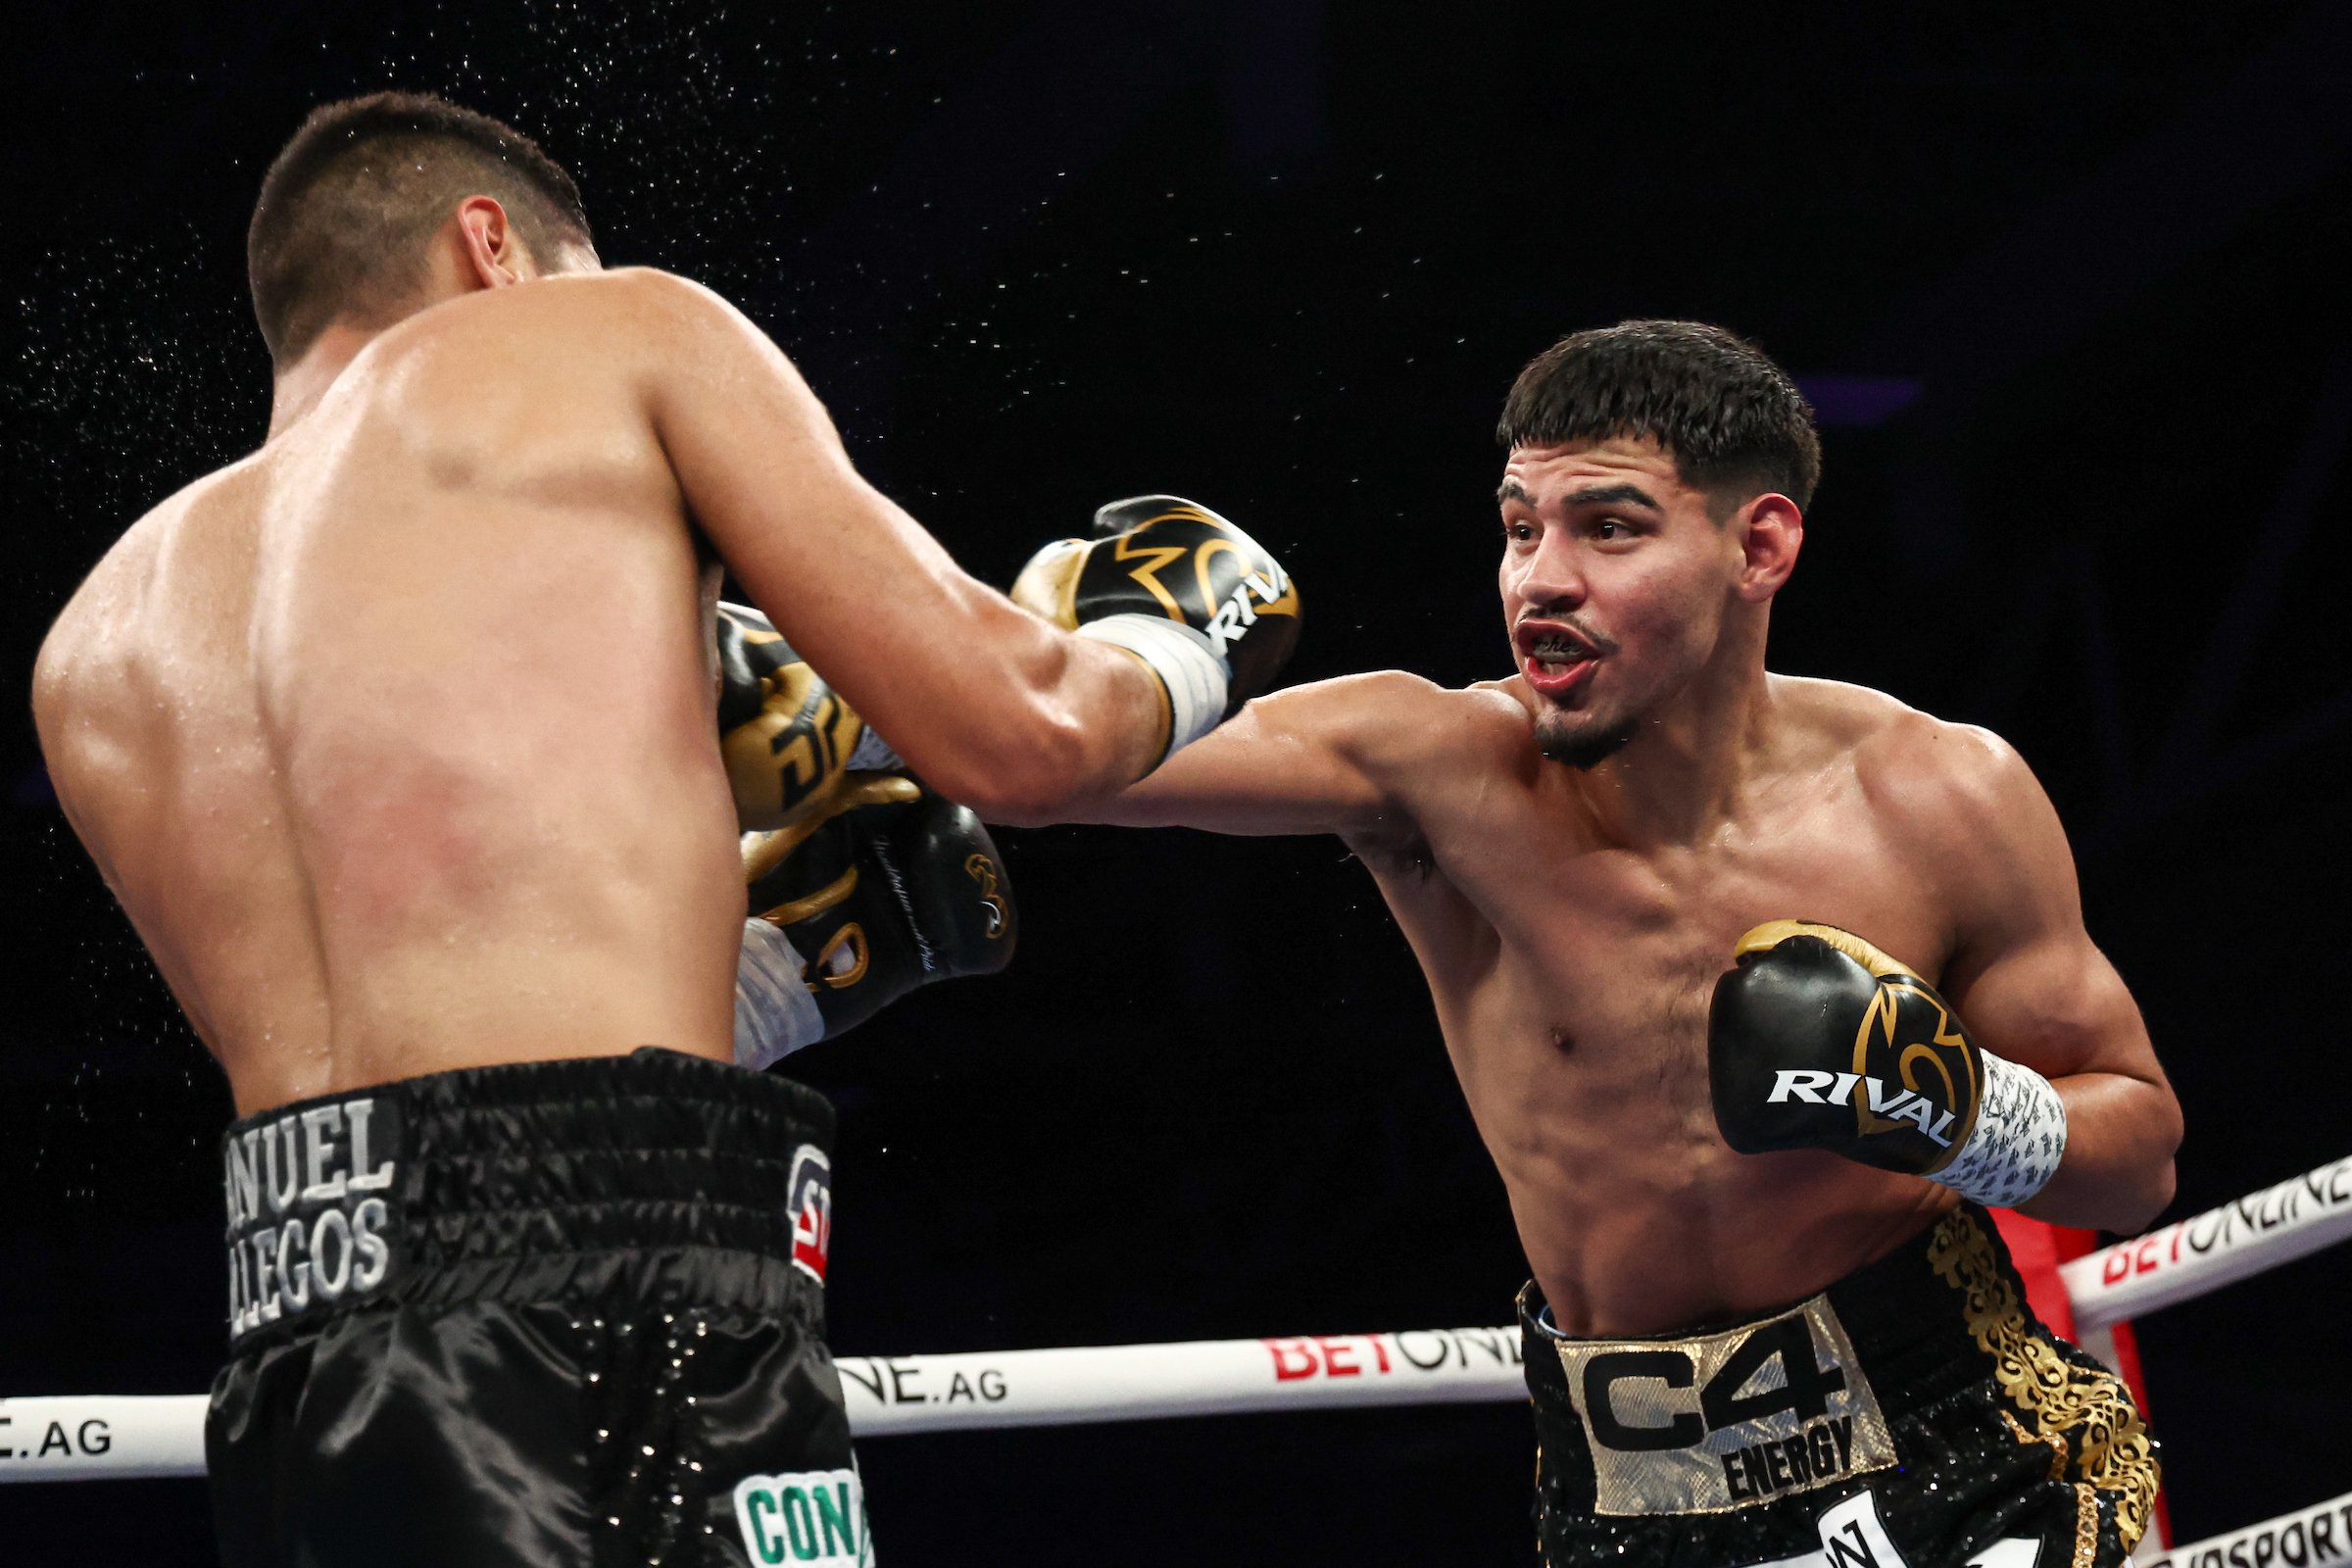 Diego Pacheco scores impressive stoppage win over Manuel Gallegos